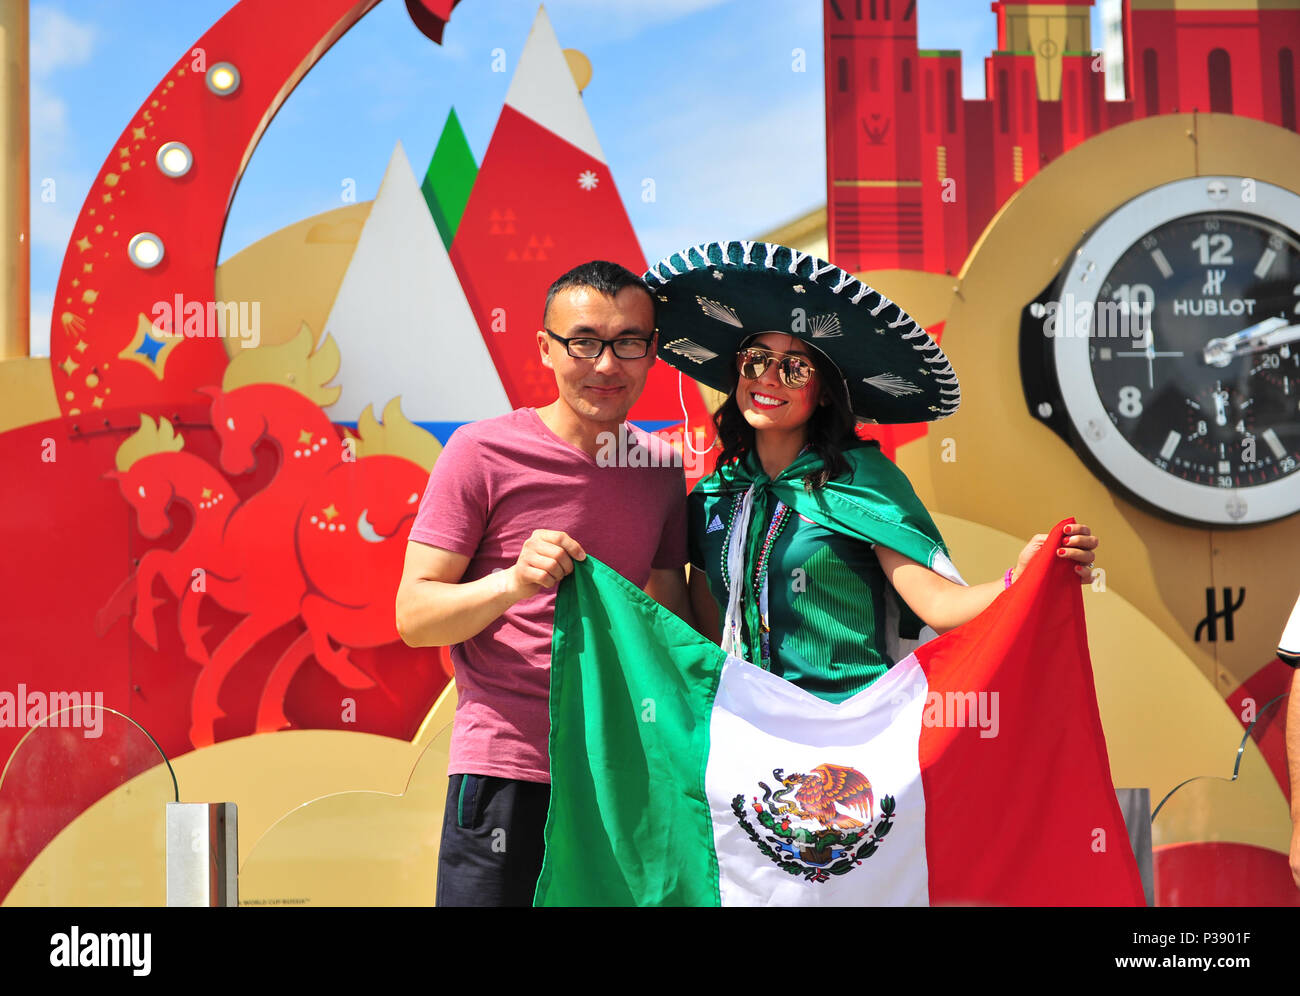 Moscow, Russia. 17th June, 2018. Fans of Mexico national football team in the street of Moscow, Russia on June 17, 2018. Credit: Krasnevsky/Alamy Live News Stock Photo